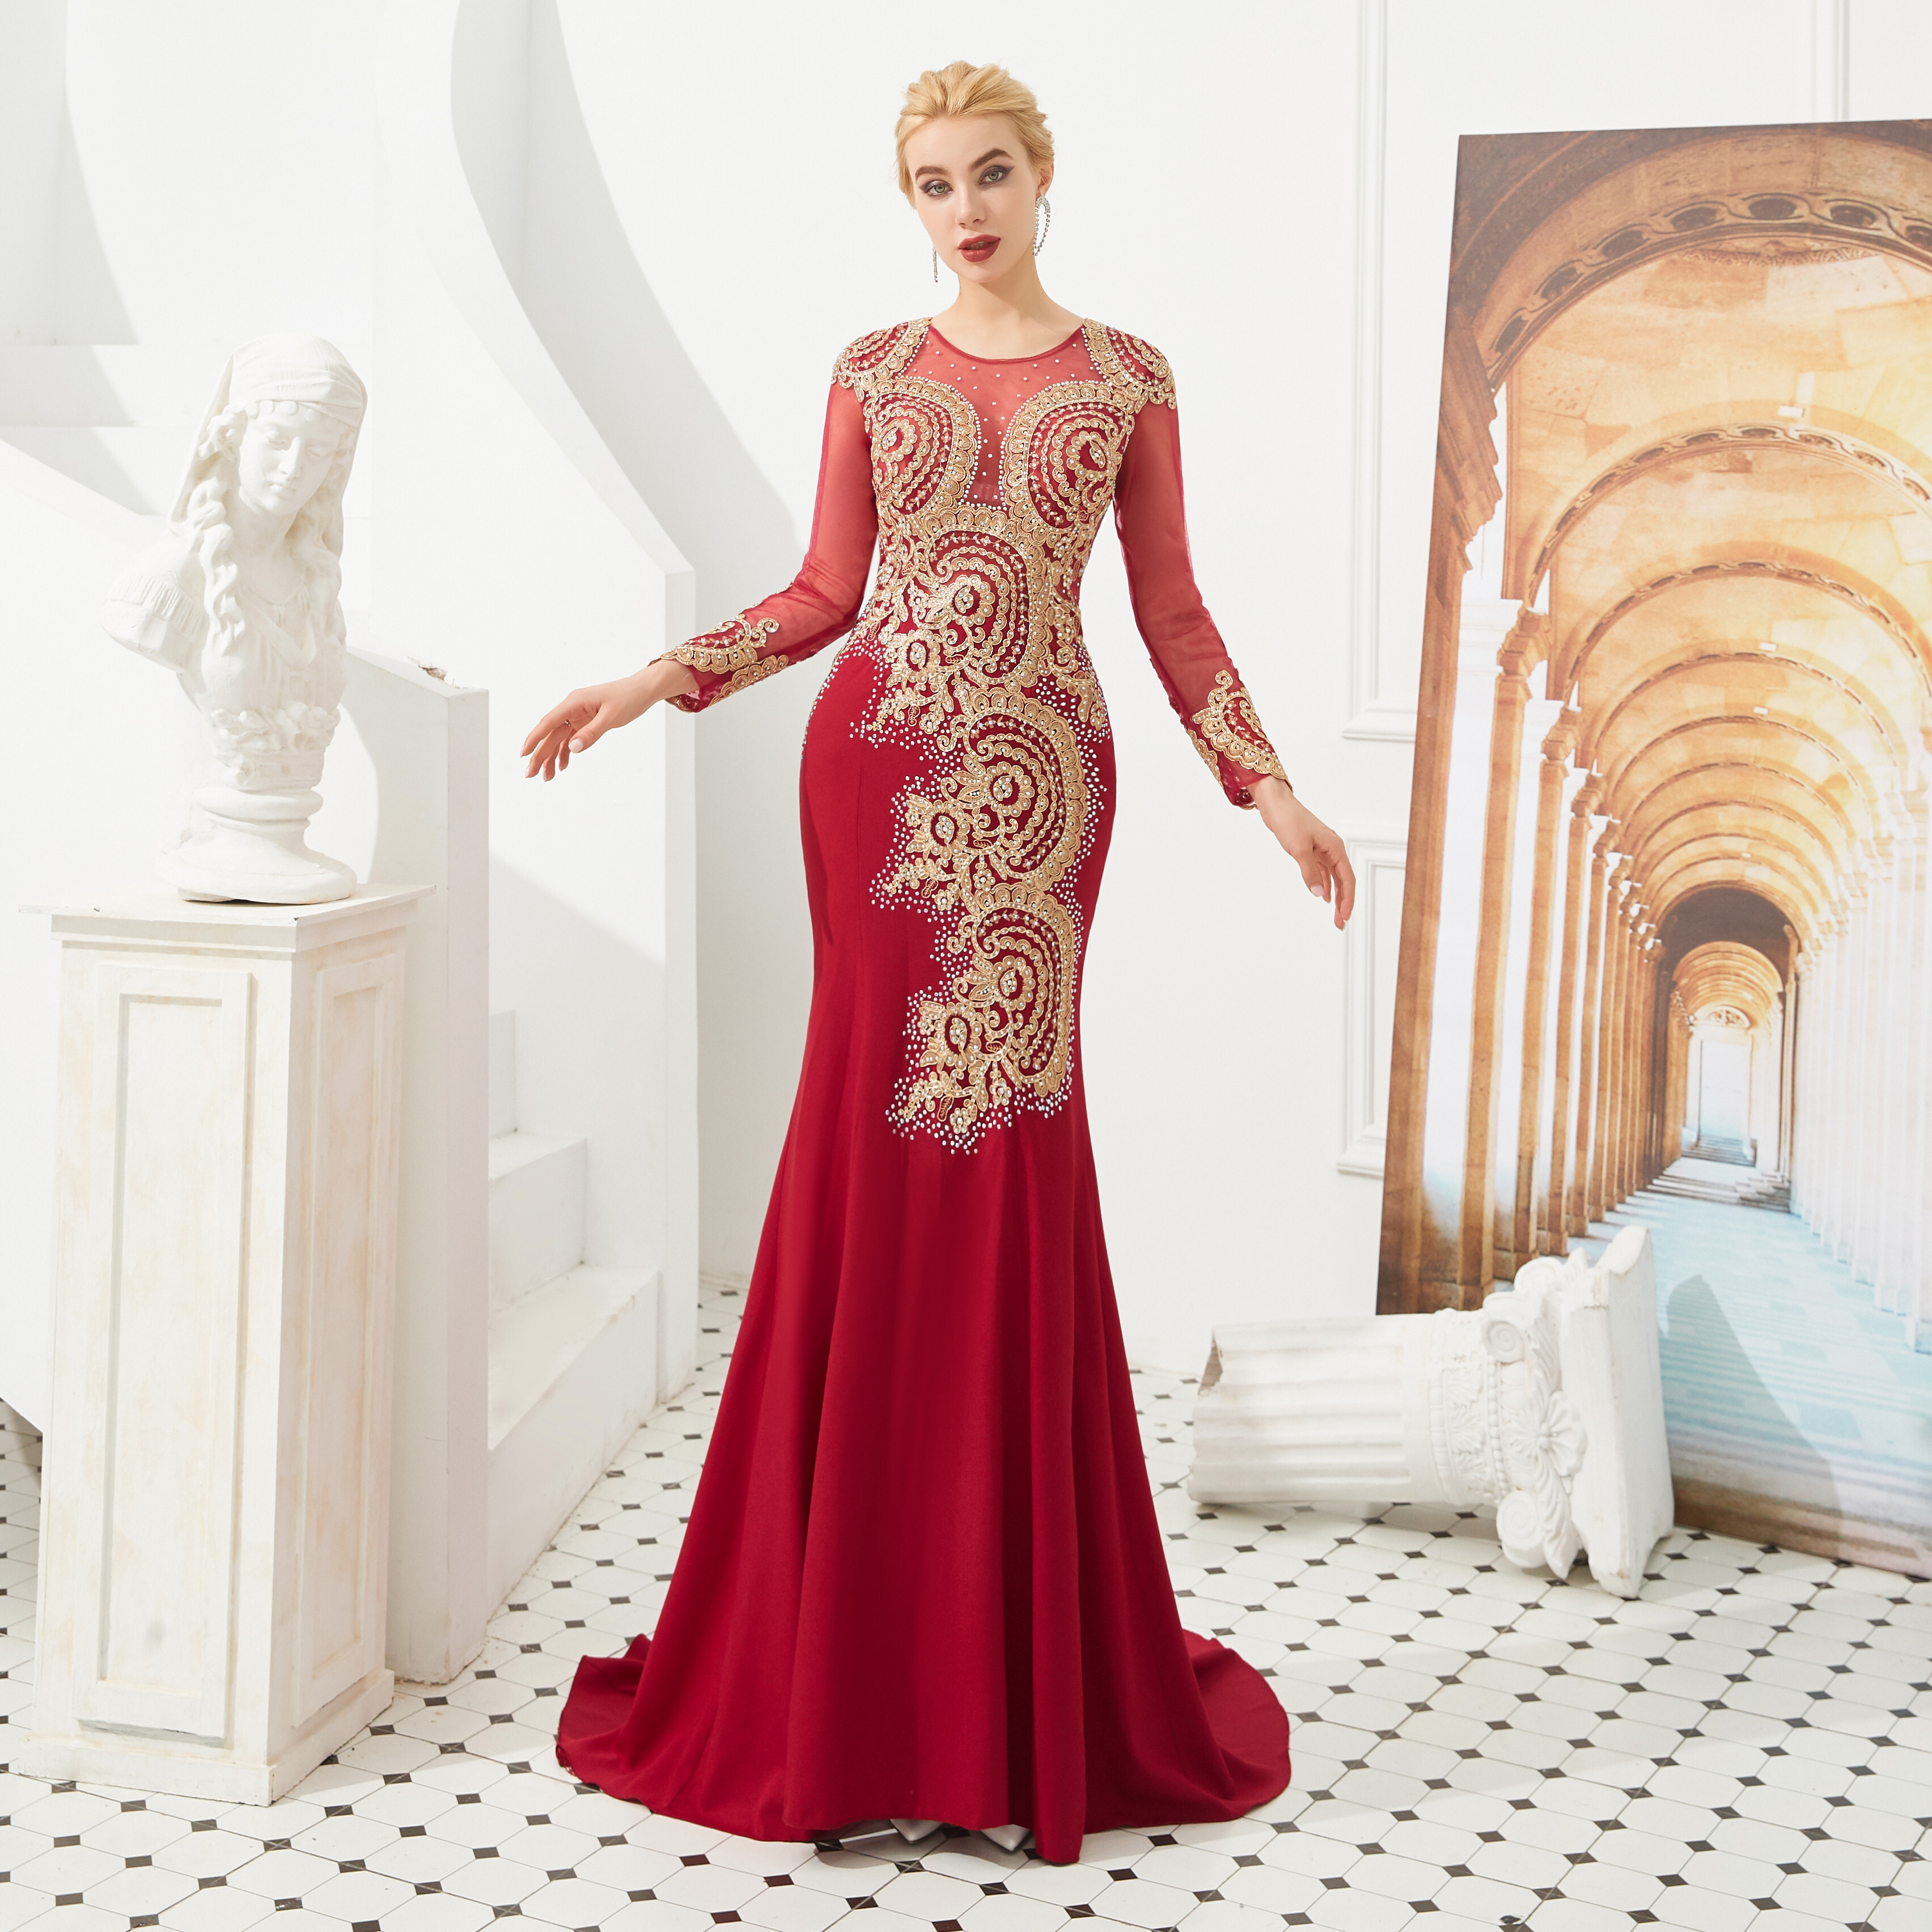 Delicate Illusion Long Sleeves Red And Gold Mermaid Long Formal Dress Delicate Illusion Long Sleeves Red And Gold Mermaid Long Formal Dress Delicate Illusion Long Sleeves Red And Gold,Ceremony Mermaid Dress,Illusion Long Sleeves Mermaid Dress,Mermaid Prom Gown Red